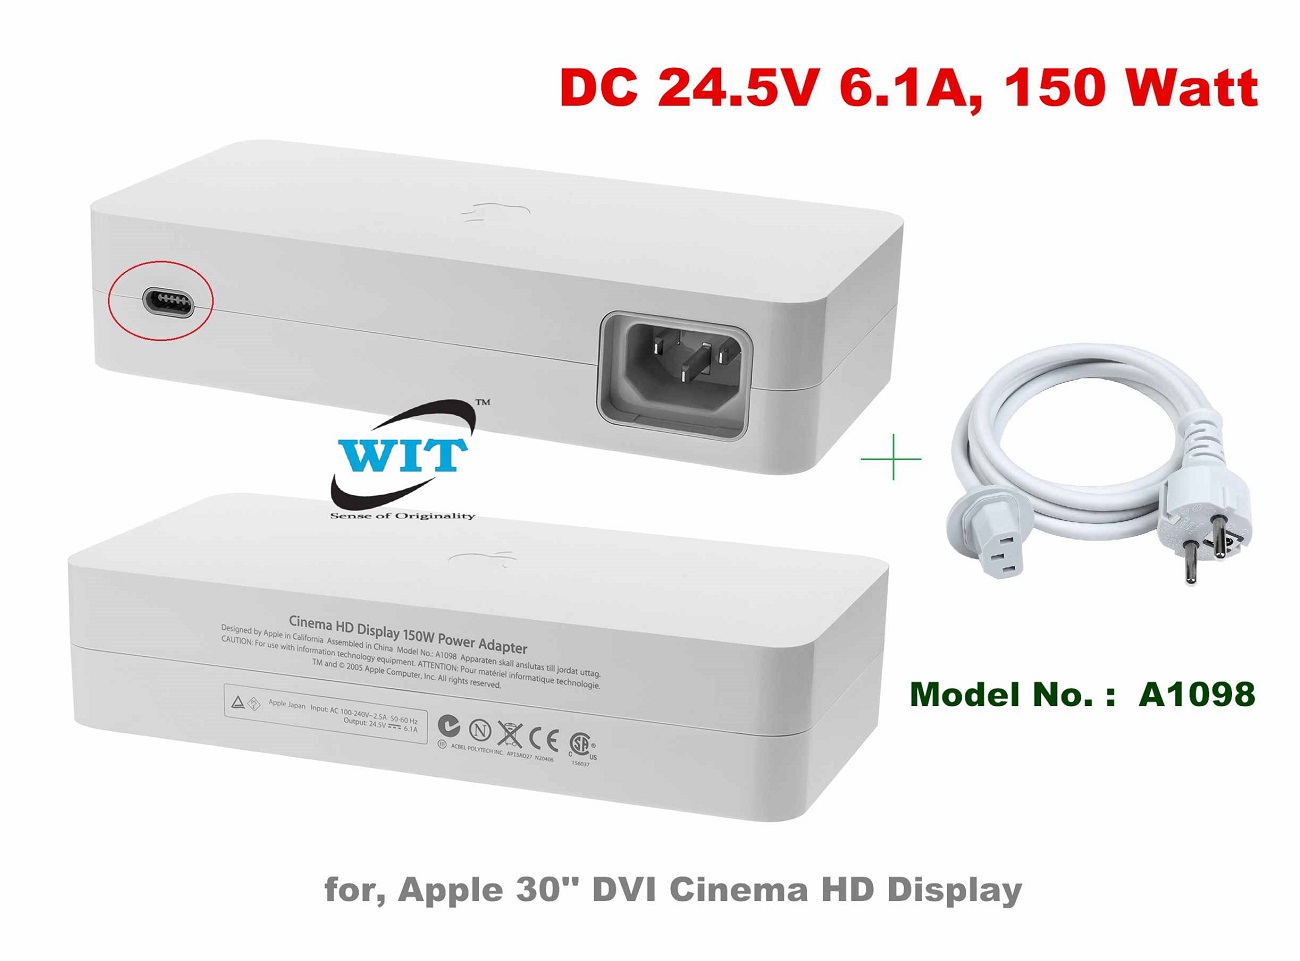 Awareness if betrayal 150W (24.5V 6.1A) Apple HD Cinema Display 30" A1083 Adapter, Model # A1098,  Apple Part # 661-3356, Year: Mid 2004, Mid 2005, & Late 2007 (m9179ll/a) -  WIT Computers